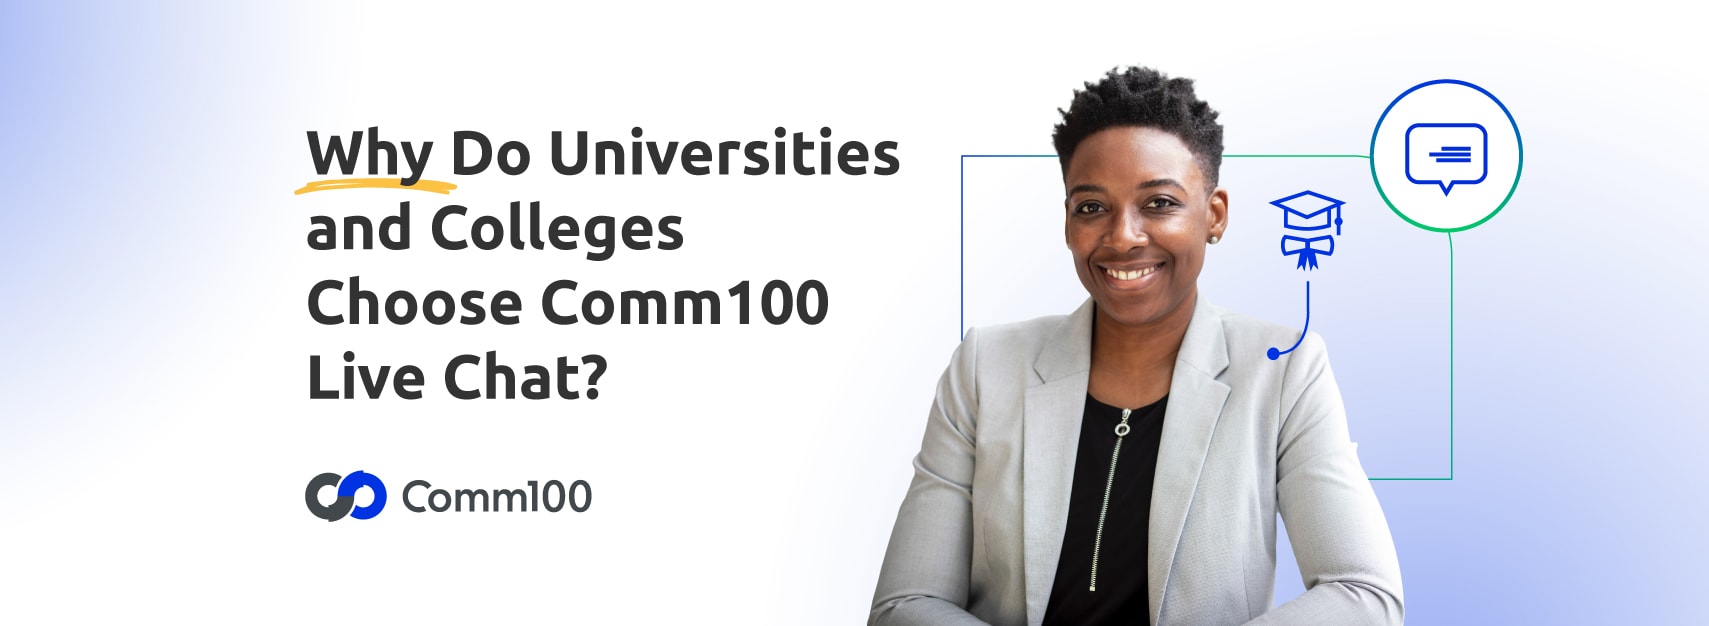 Why do Universities & Colleges Choose Comm100 Live Chat?